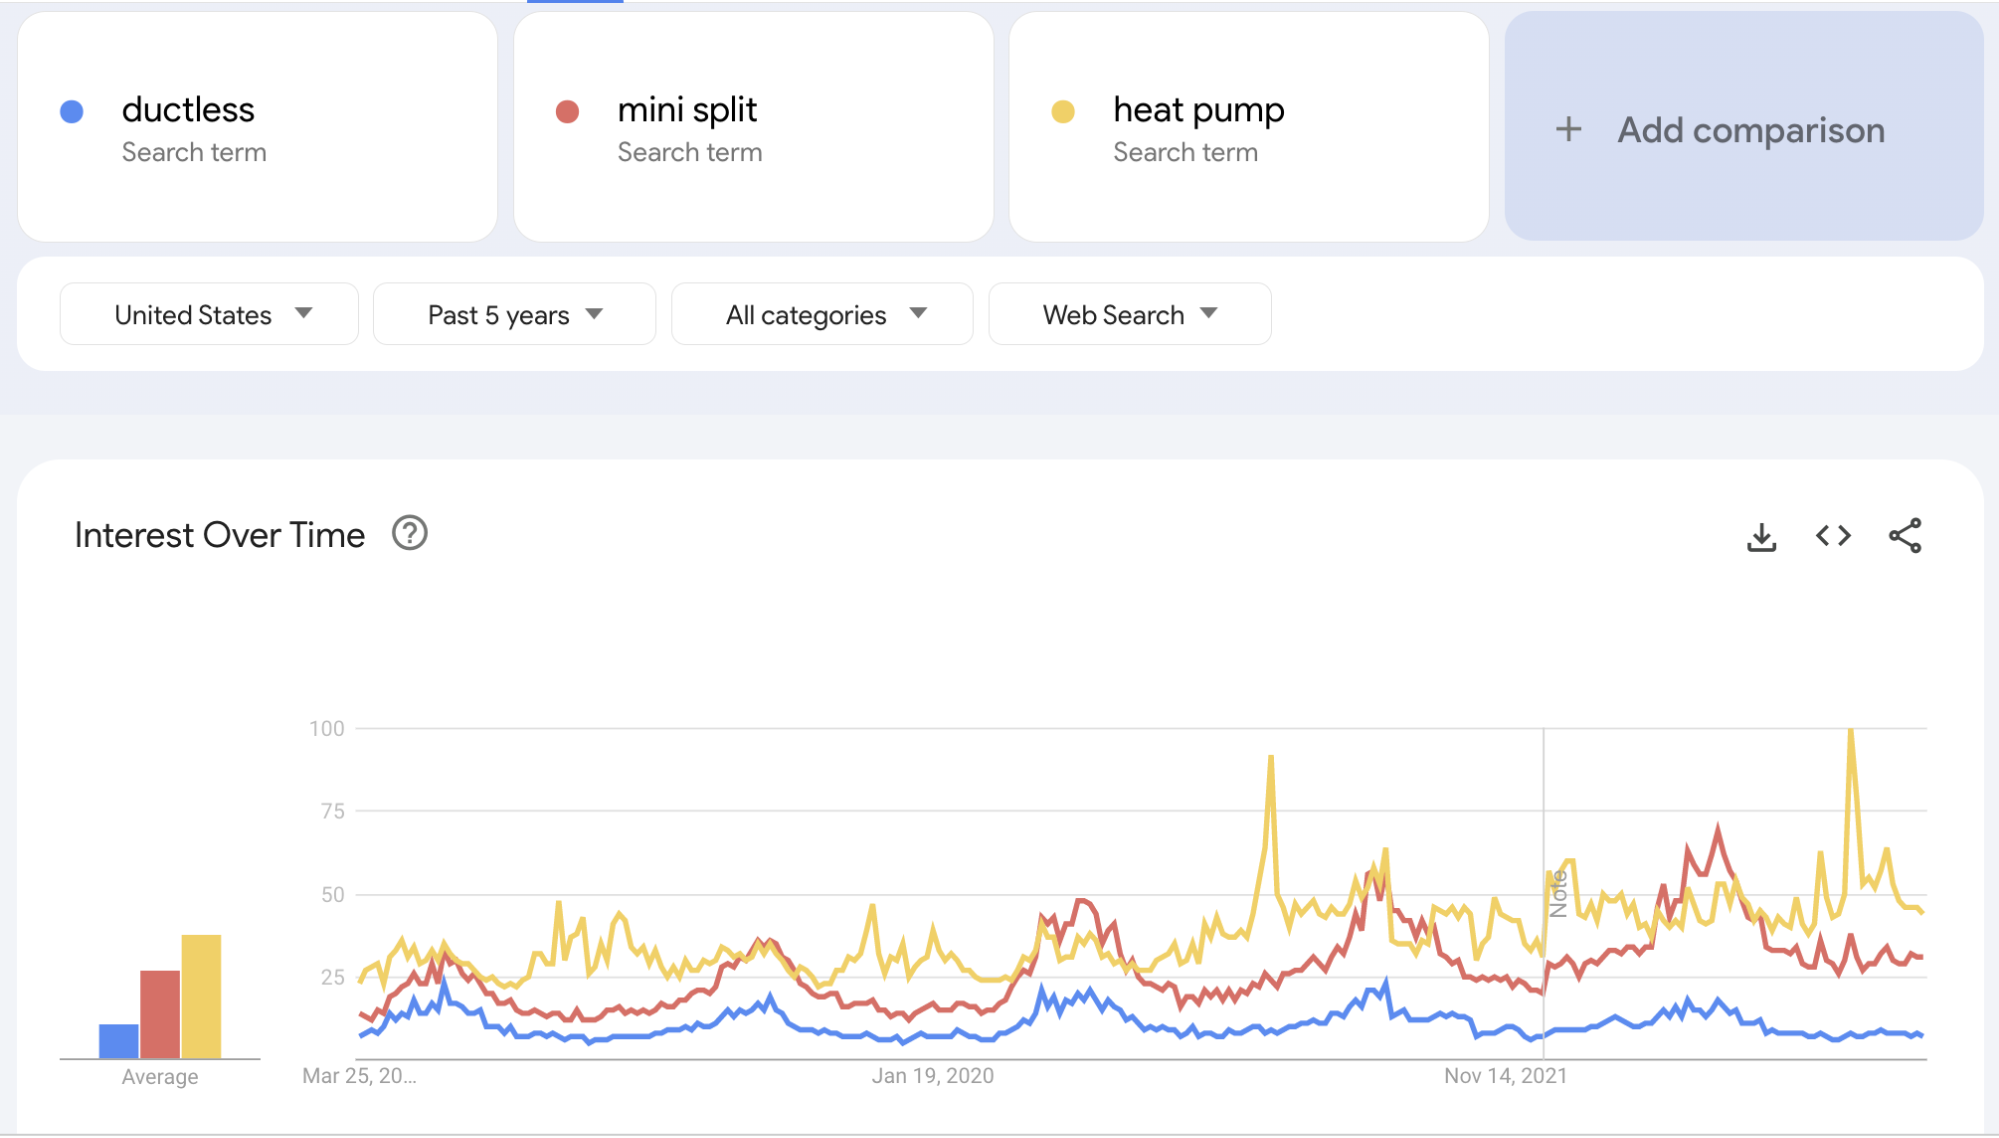 heat pump search trends according to Google Trends